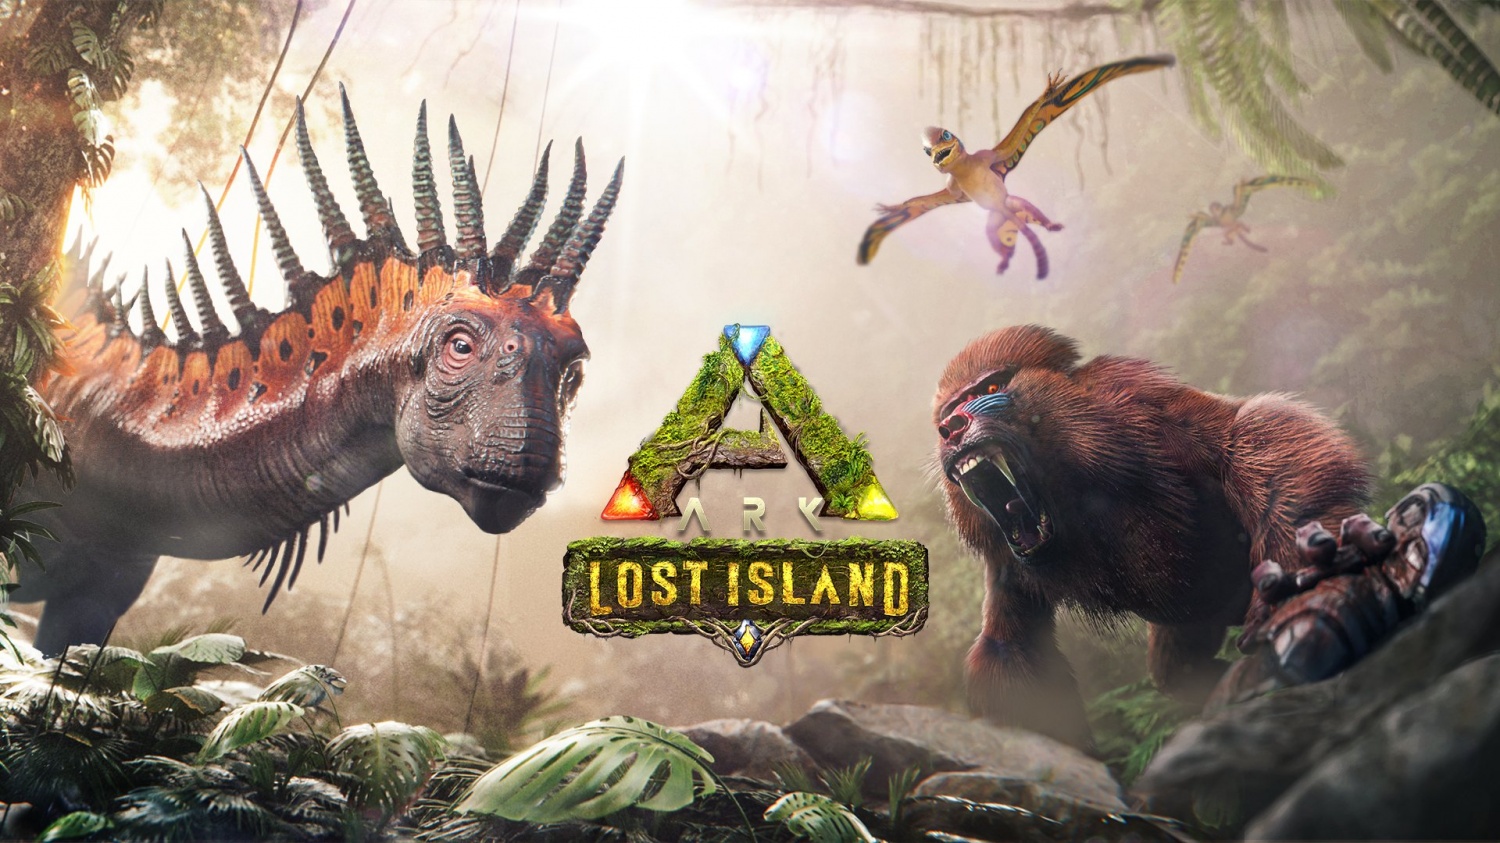 'Ark Survival Evolved' 'Lost Island' DLC Guide New Map, Dinosaurs, and